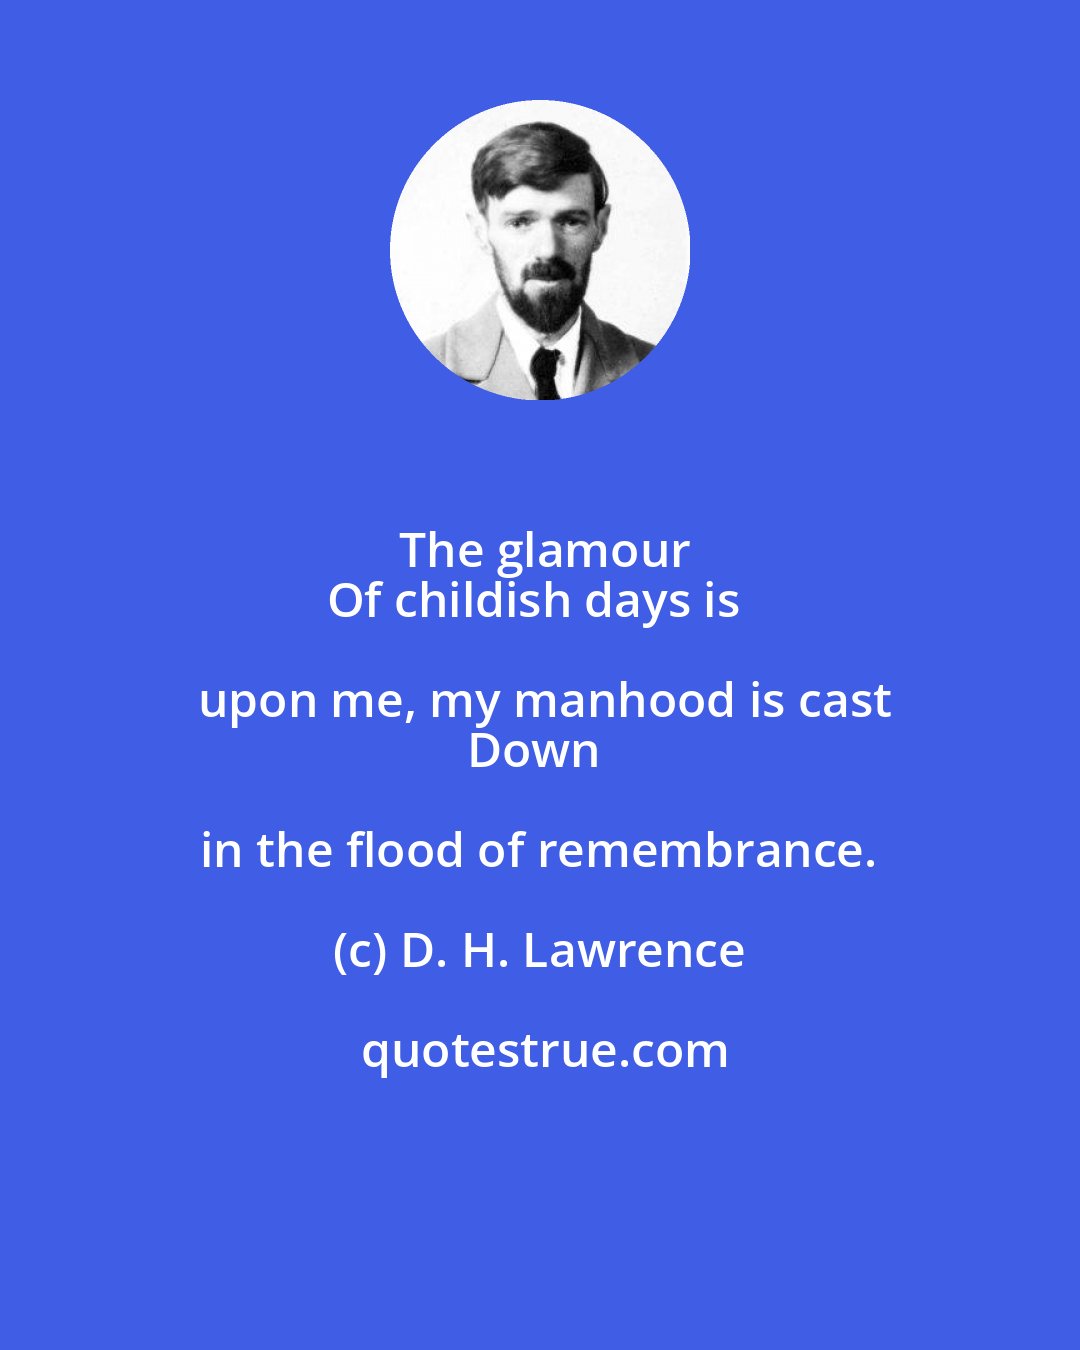 D. H. Lawrence: The glamour
Of childish days is upon me, my manhood is cast
Down in the flood of remembrance.